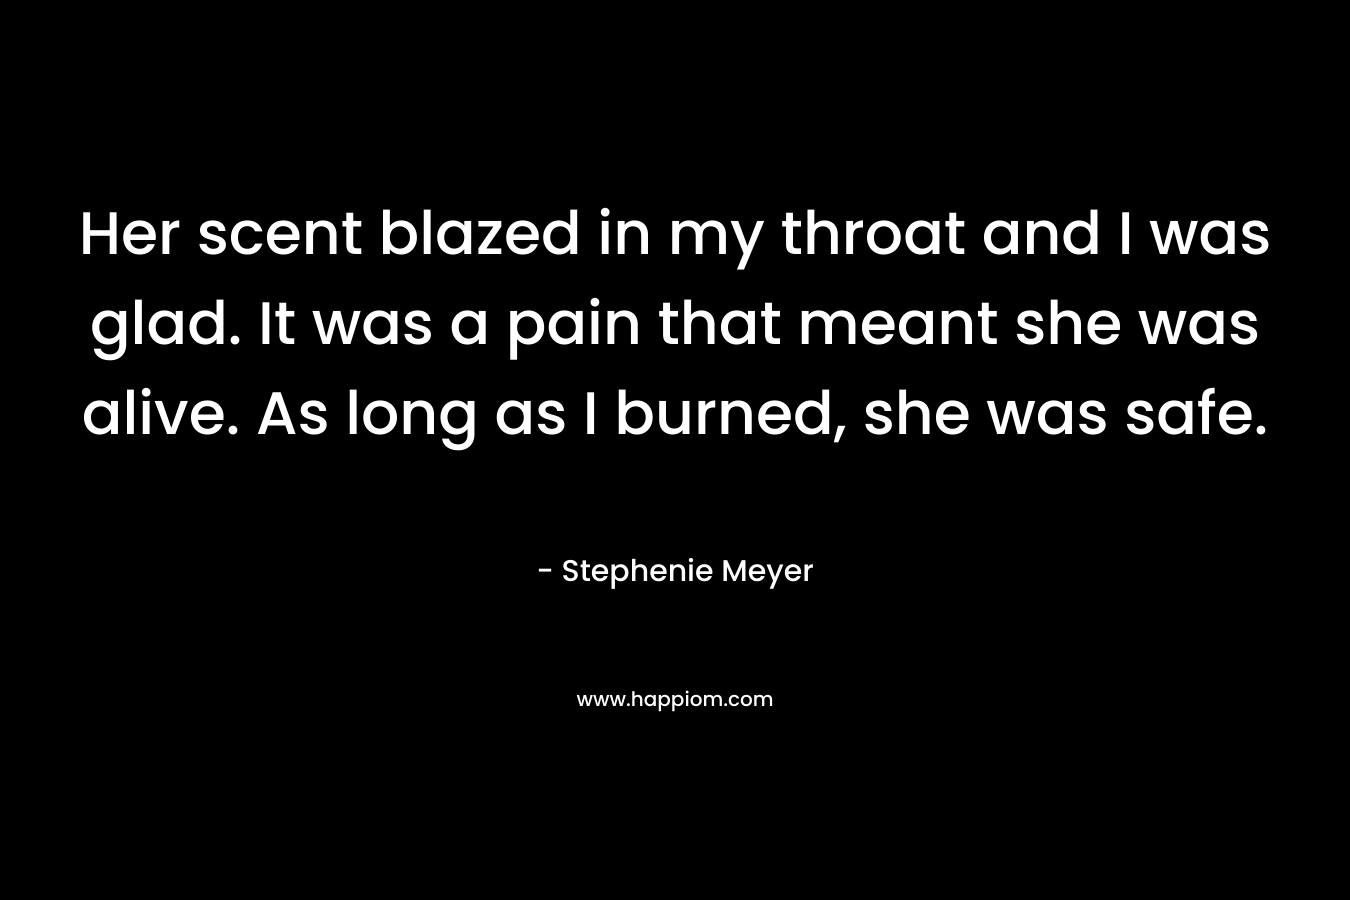 Her scent blazed in my throat and I was glad. It was a pain that meant she was alive. As long as I burned, she was safe. – Stephenie Meyer